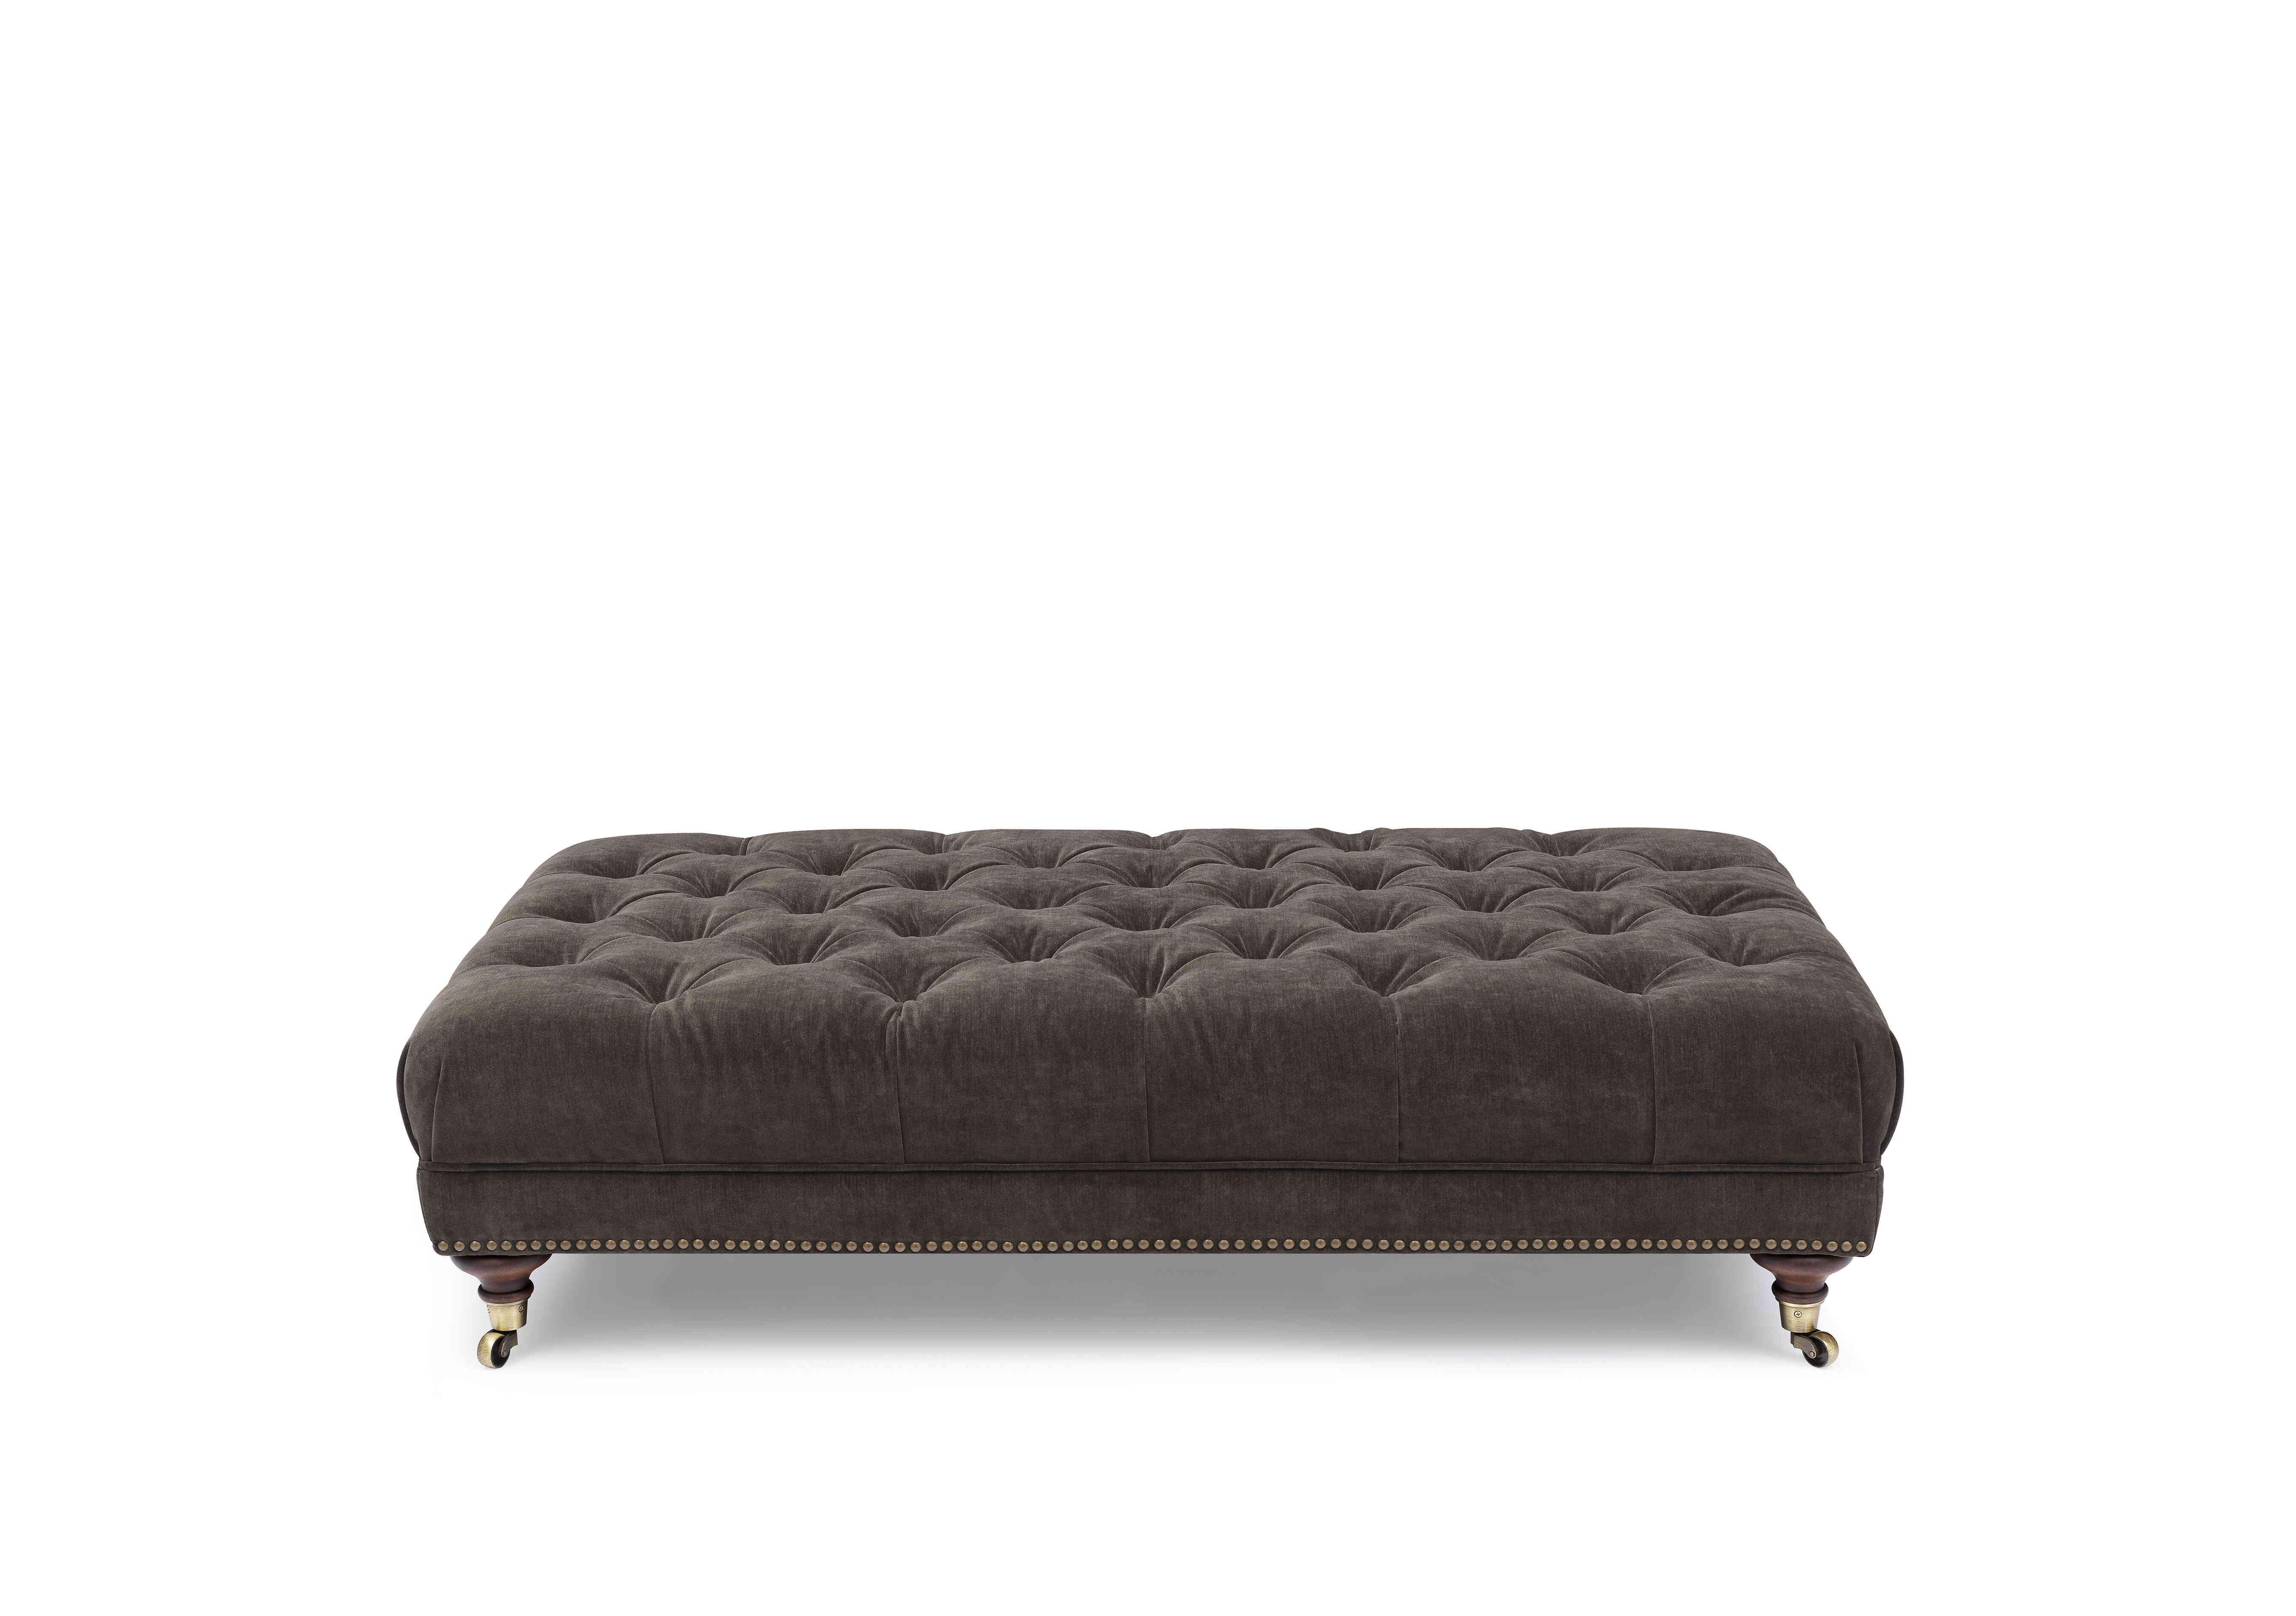 Wallace Fabric Rectangular Footstool with Castors in X3y1-W020 Brindle on Furniture Village